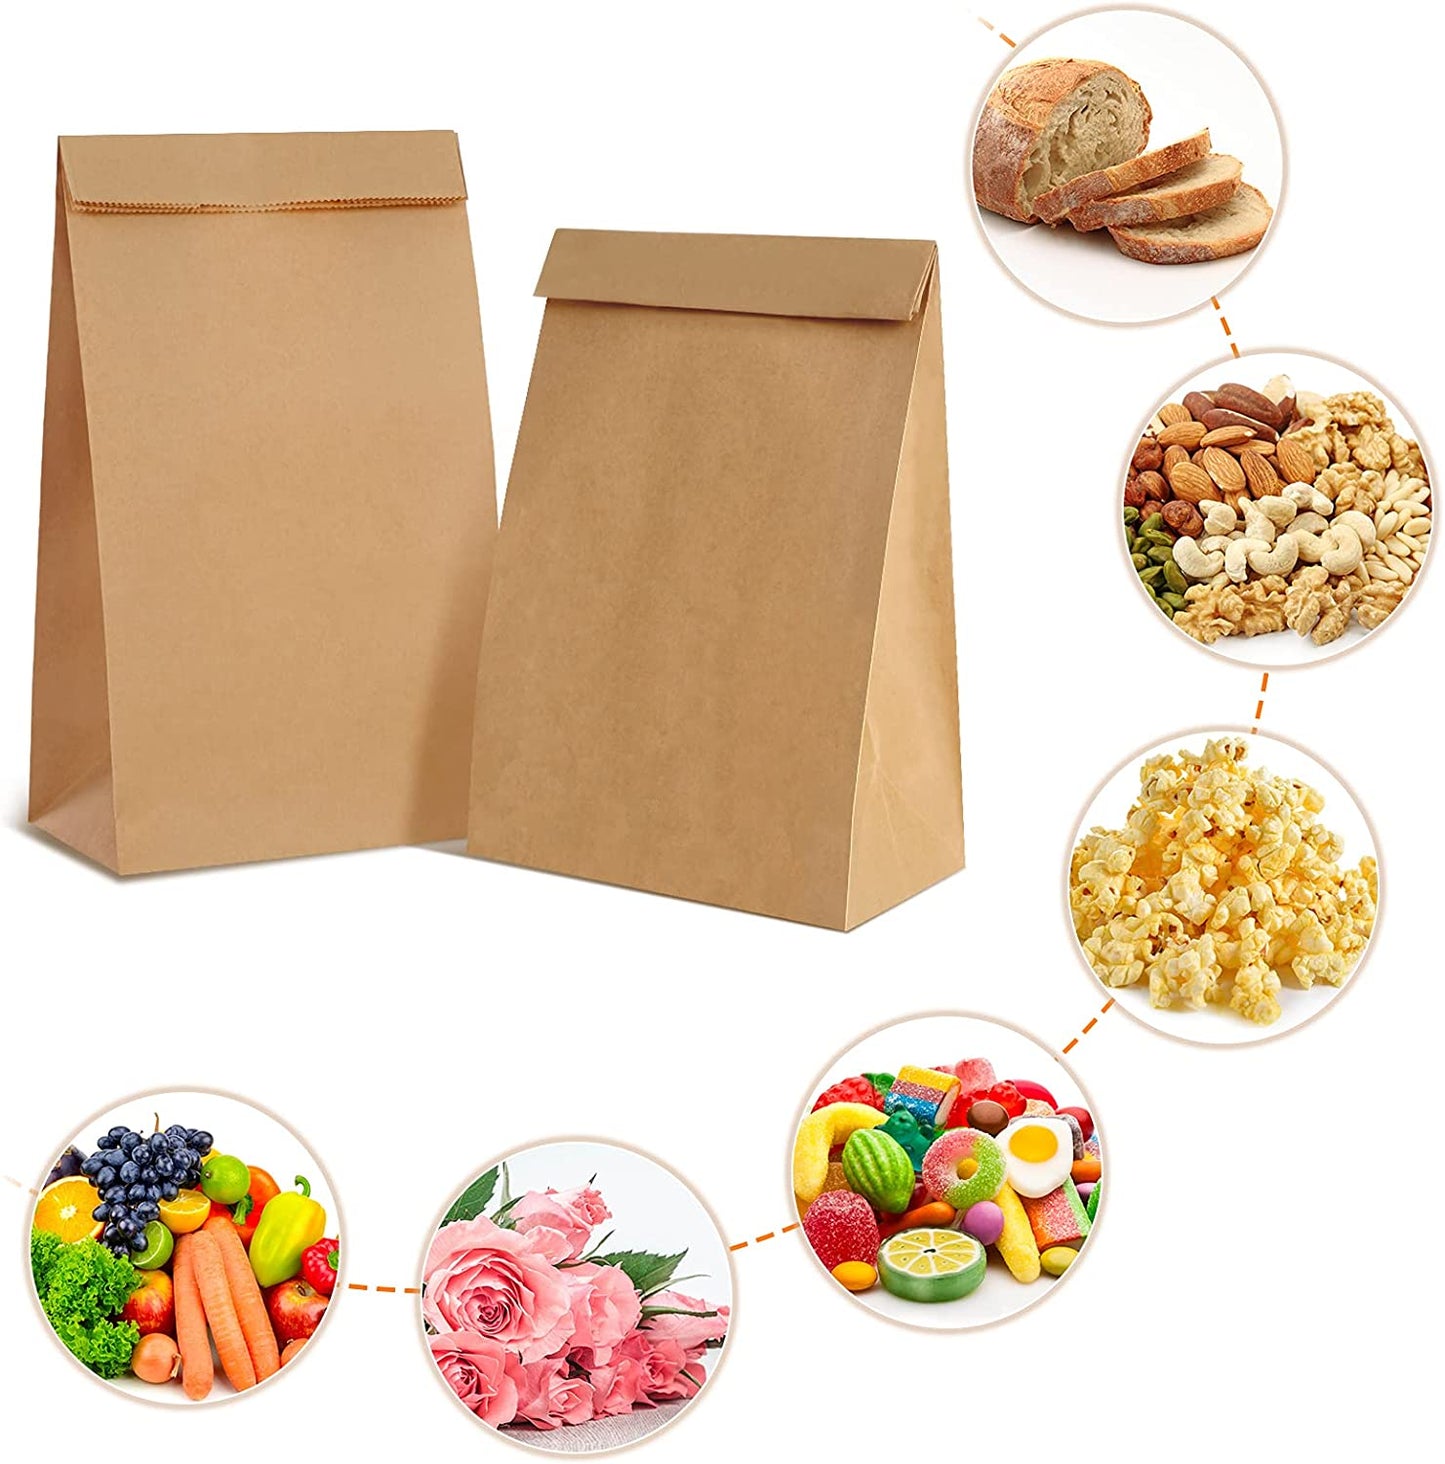 ECO Friendly Paper Sandwich & Snack Bags by TOASTABAGS - 25 Bags